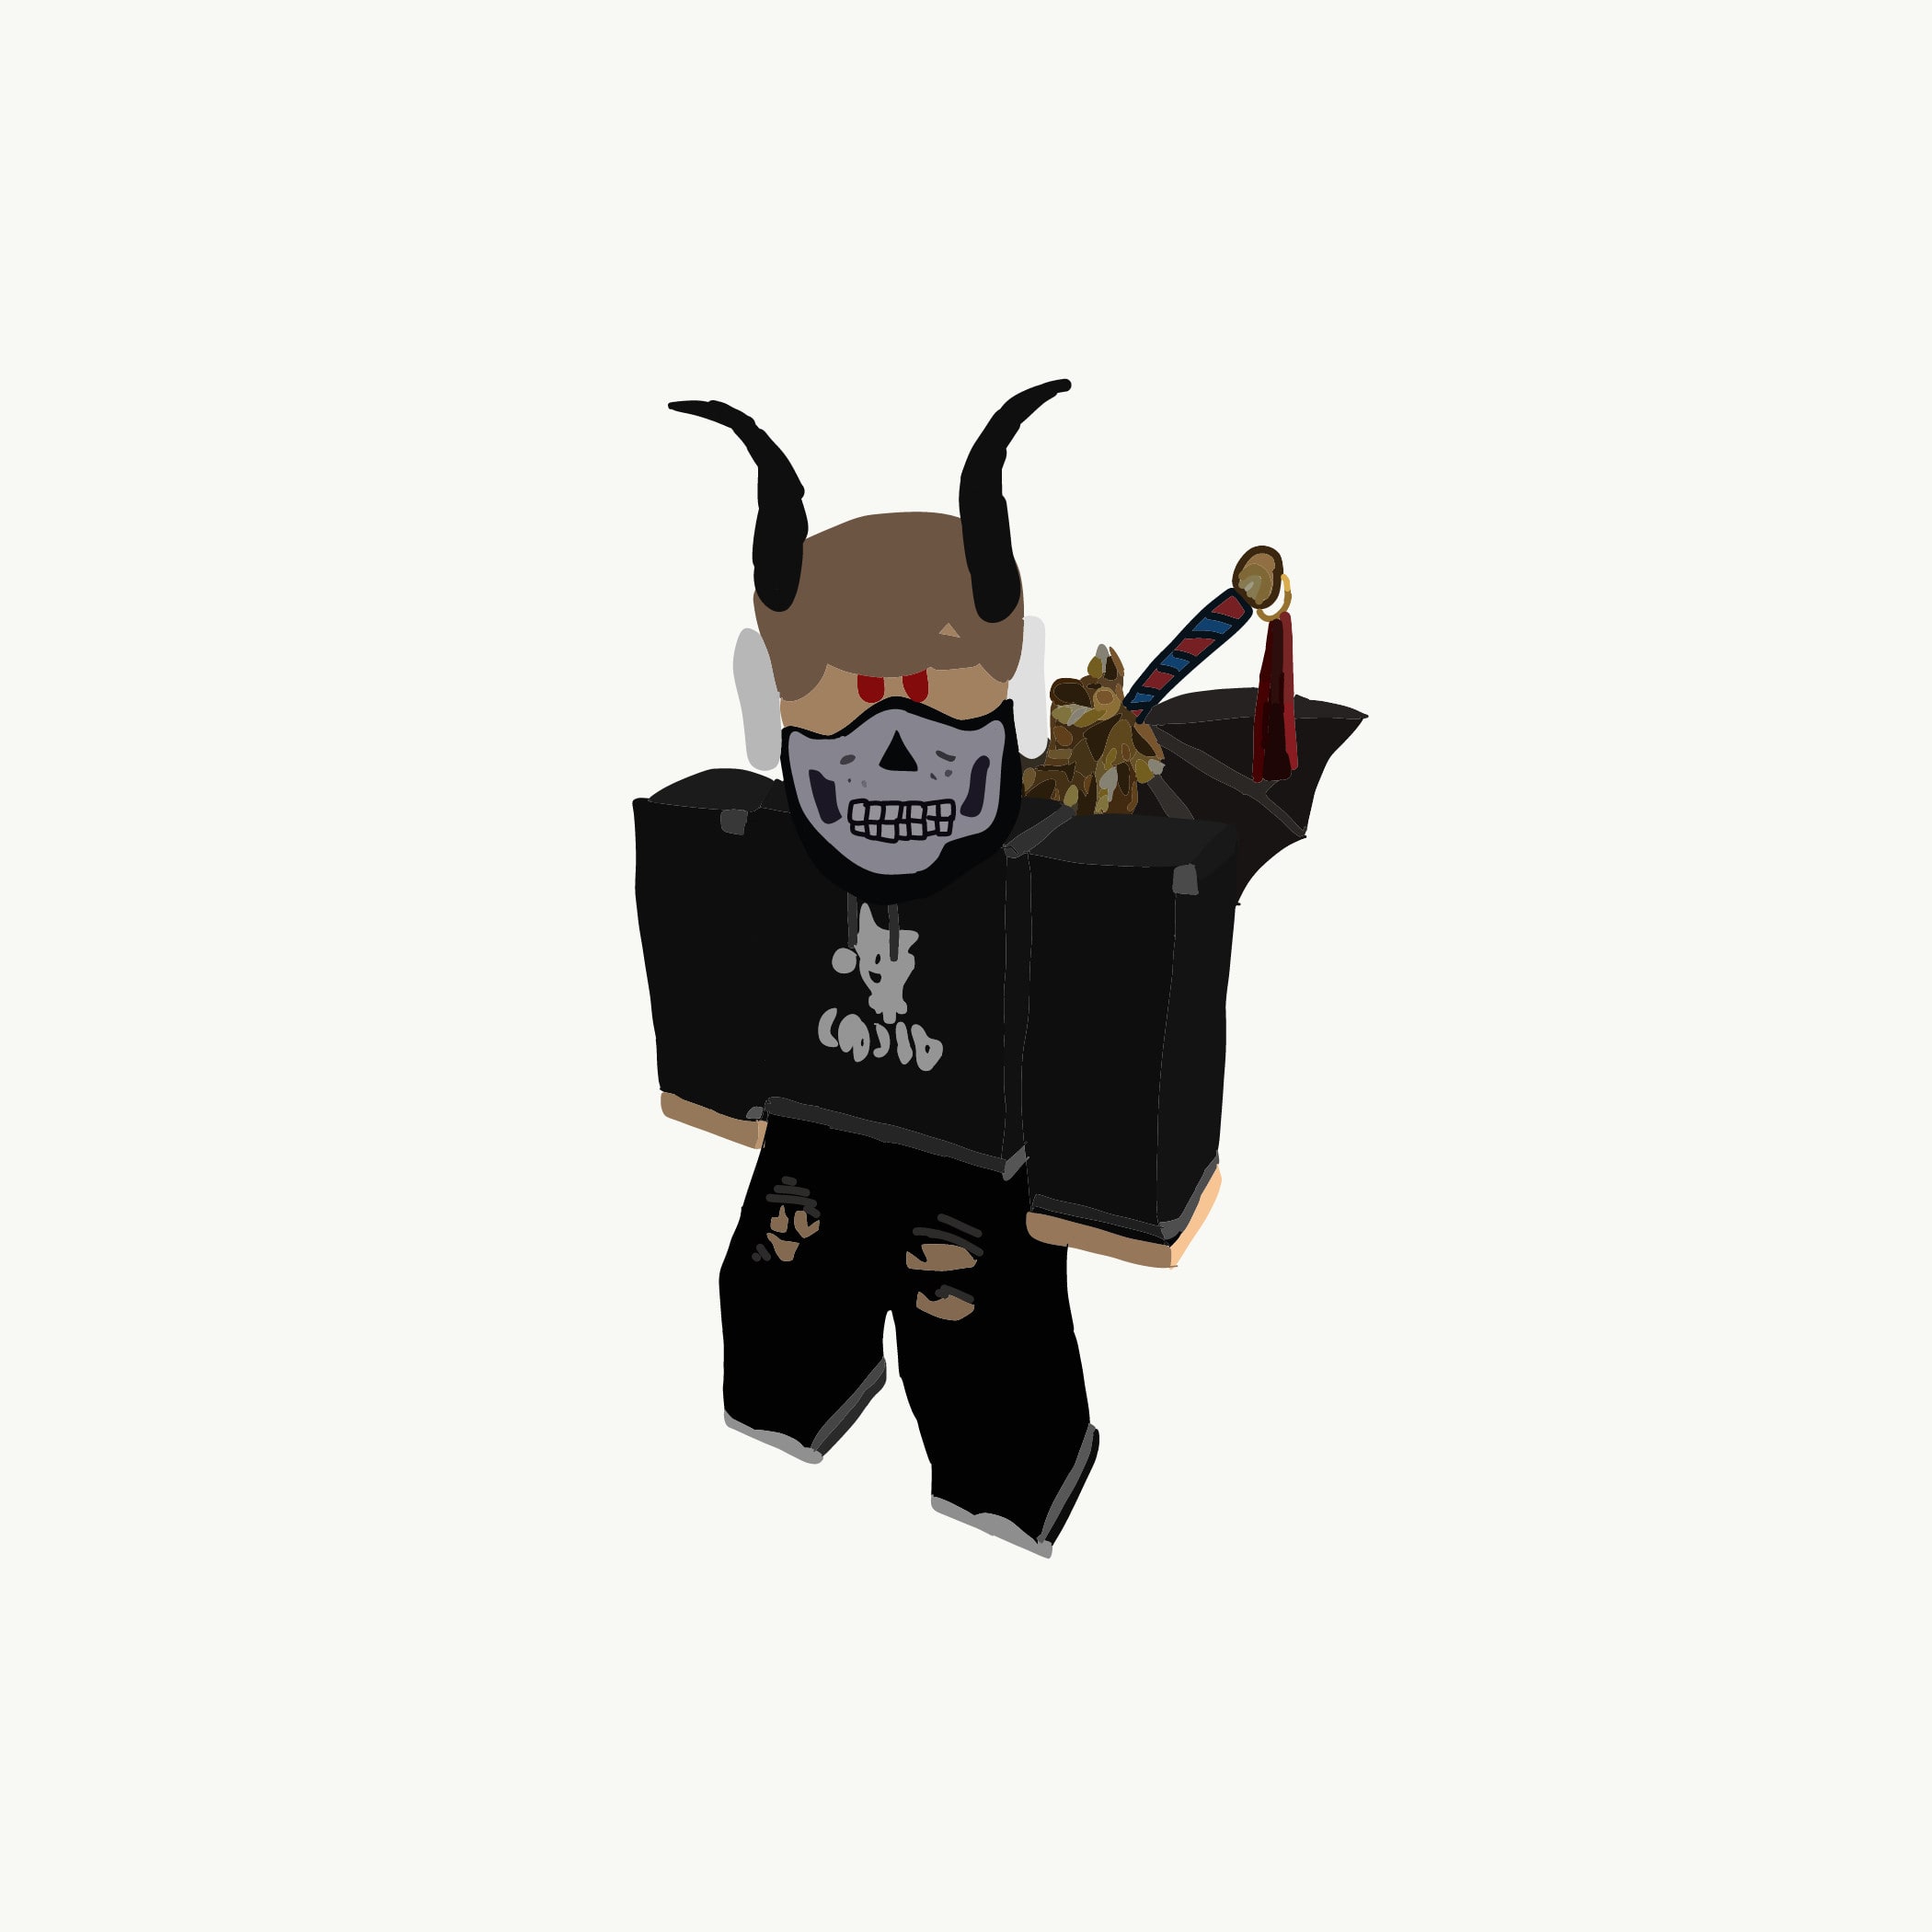 Draw Your Roblox Avatar 2d Or 3d By Mrnose - roblox halloween avatar png